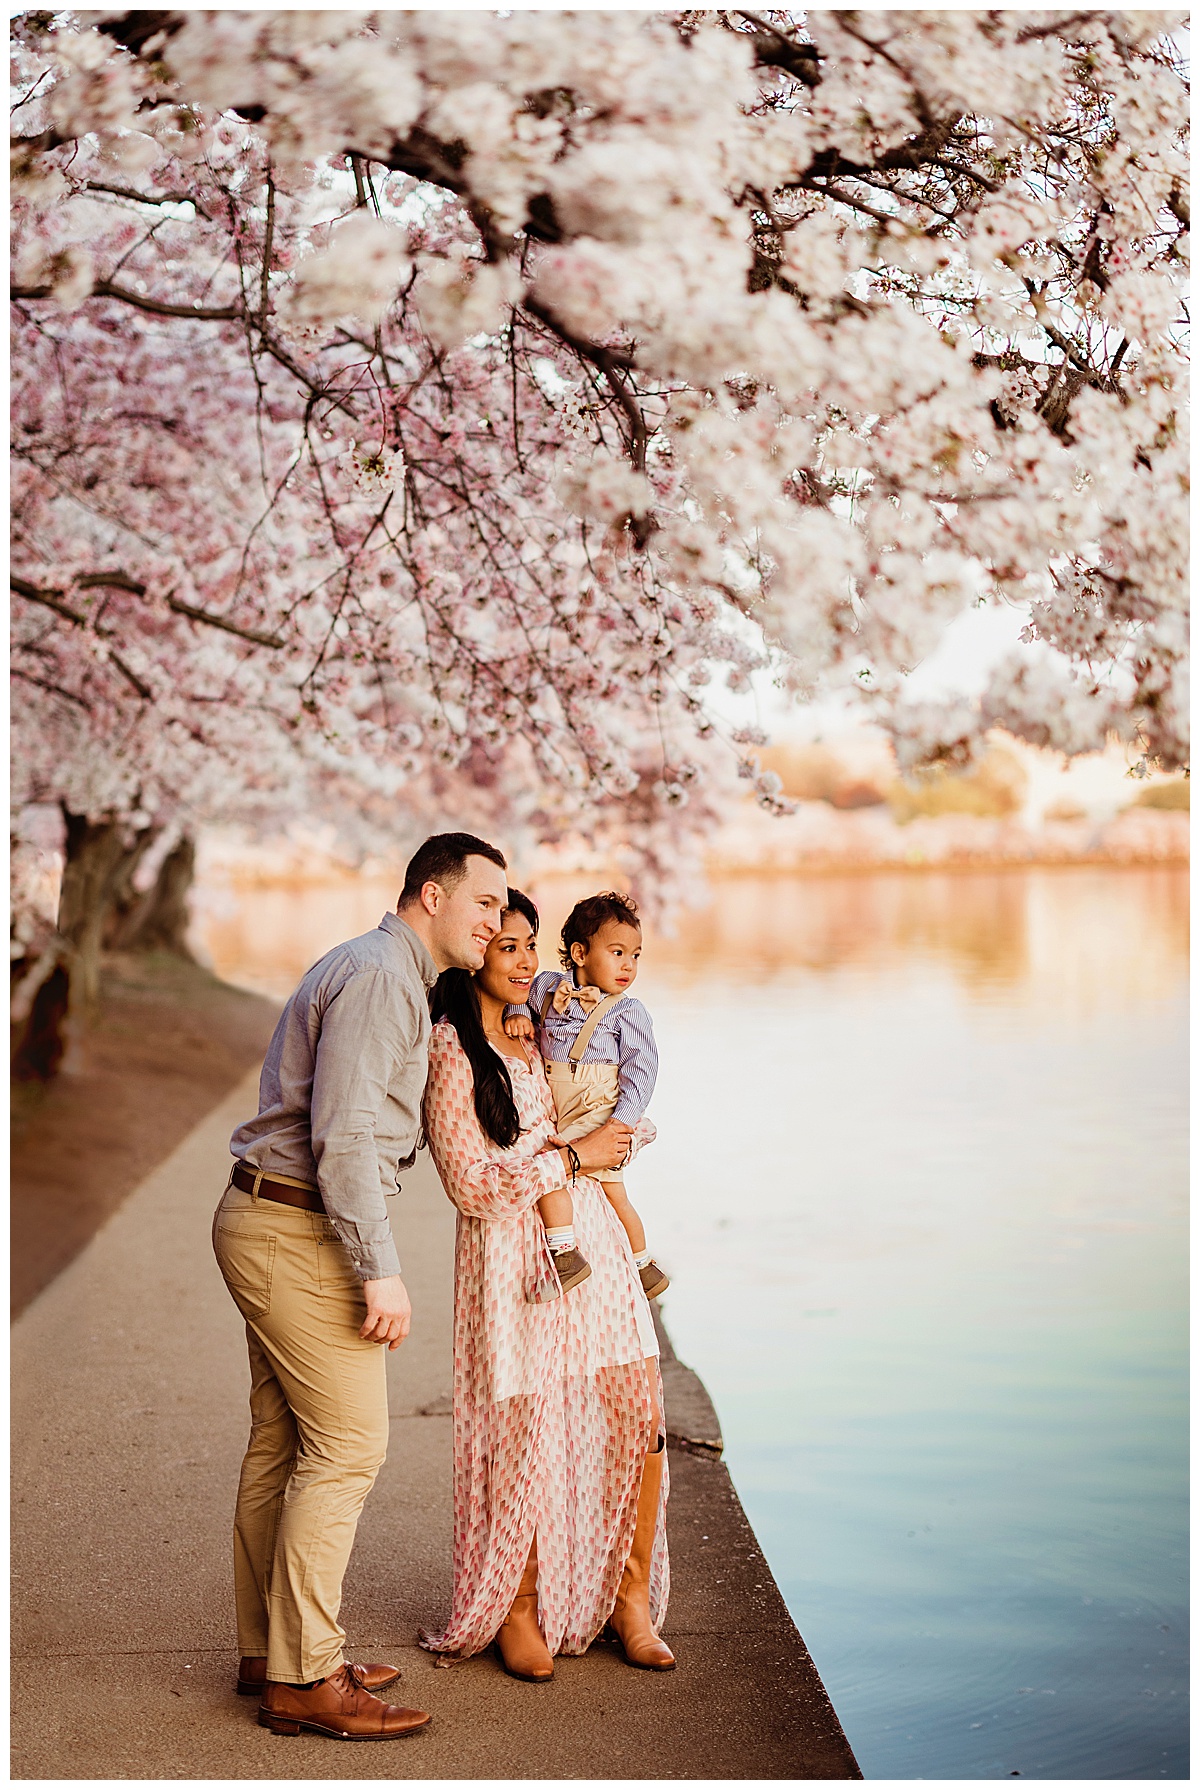 Family stand together near water during their DC Cherry Blossom Photographer